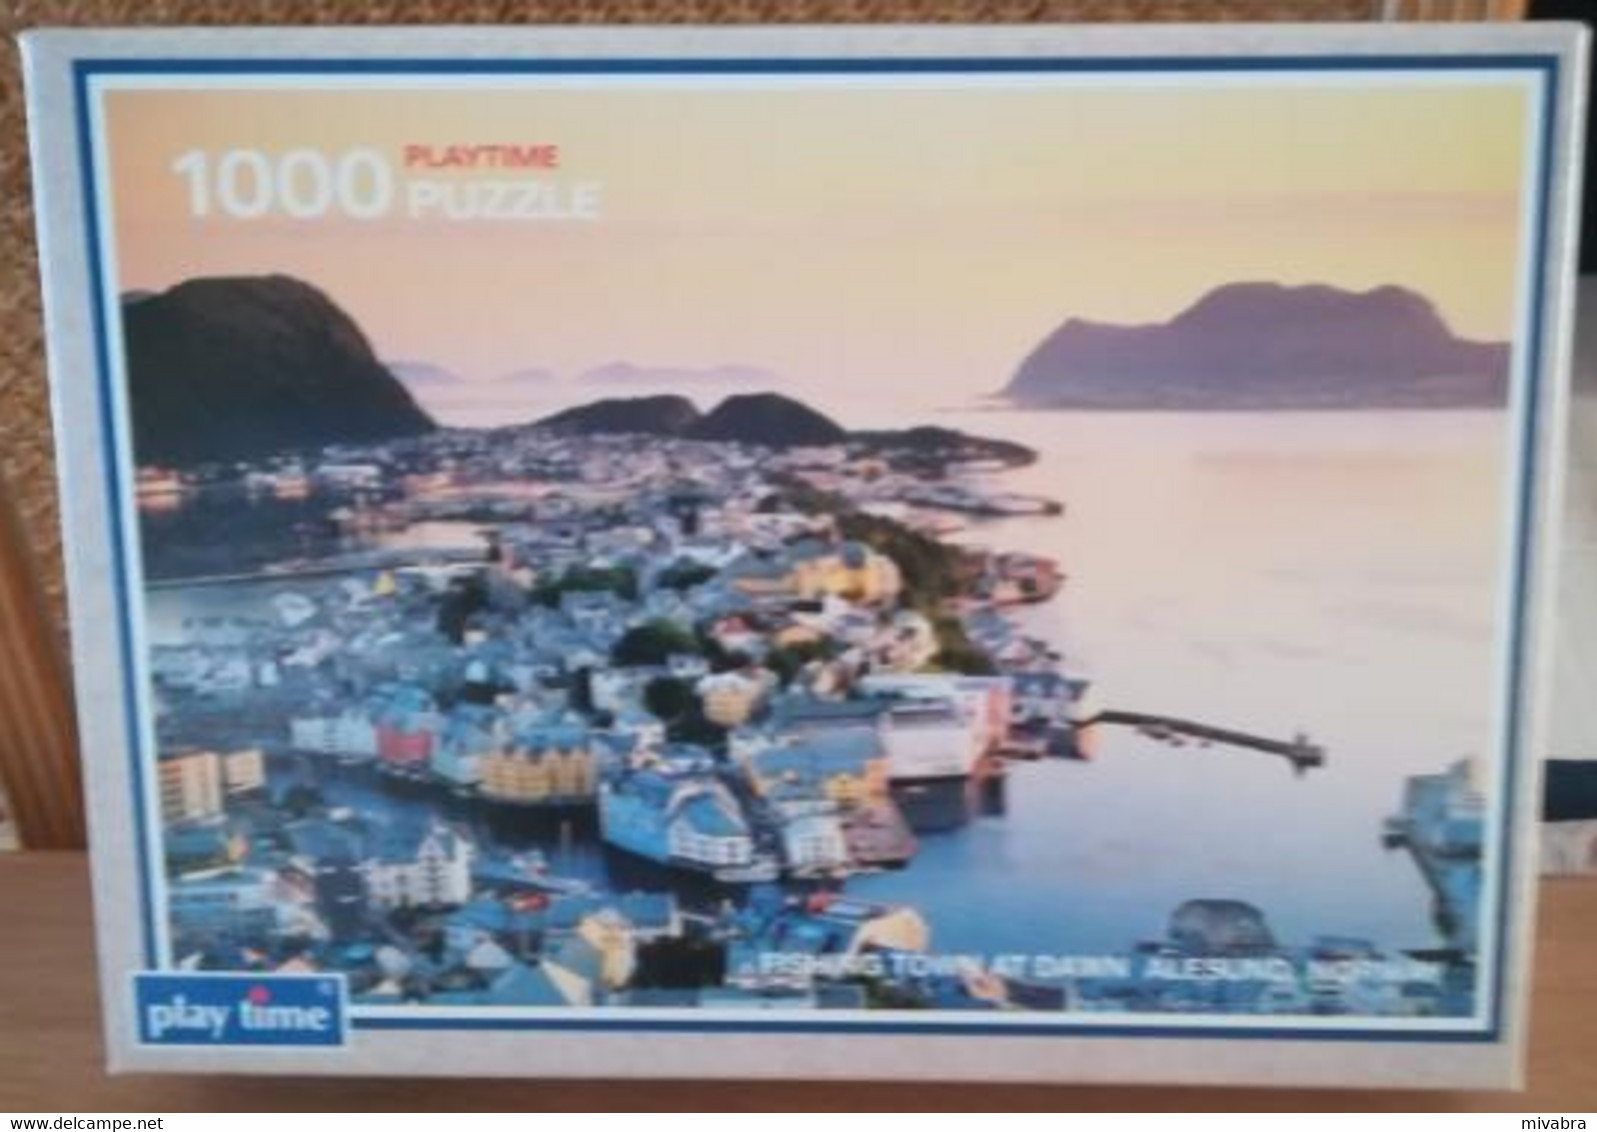 ALESUND NORWAY FISHING TOWN AT DAWN - PLAY TIME JIGSAW Puzzle 1000 Stukjes - Puzzle Games